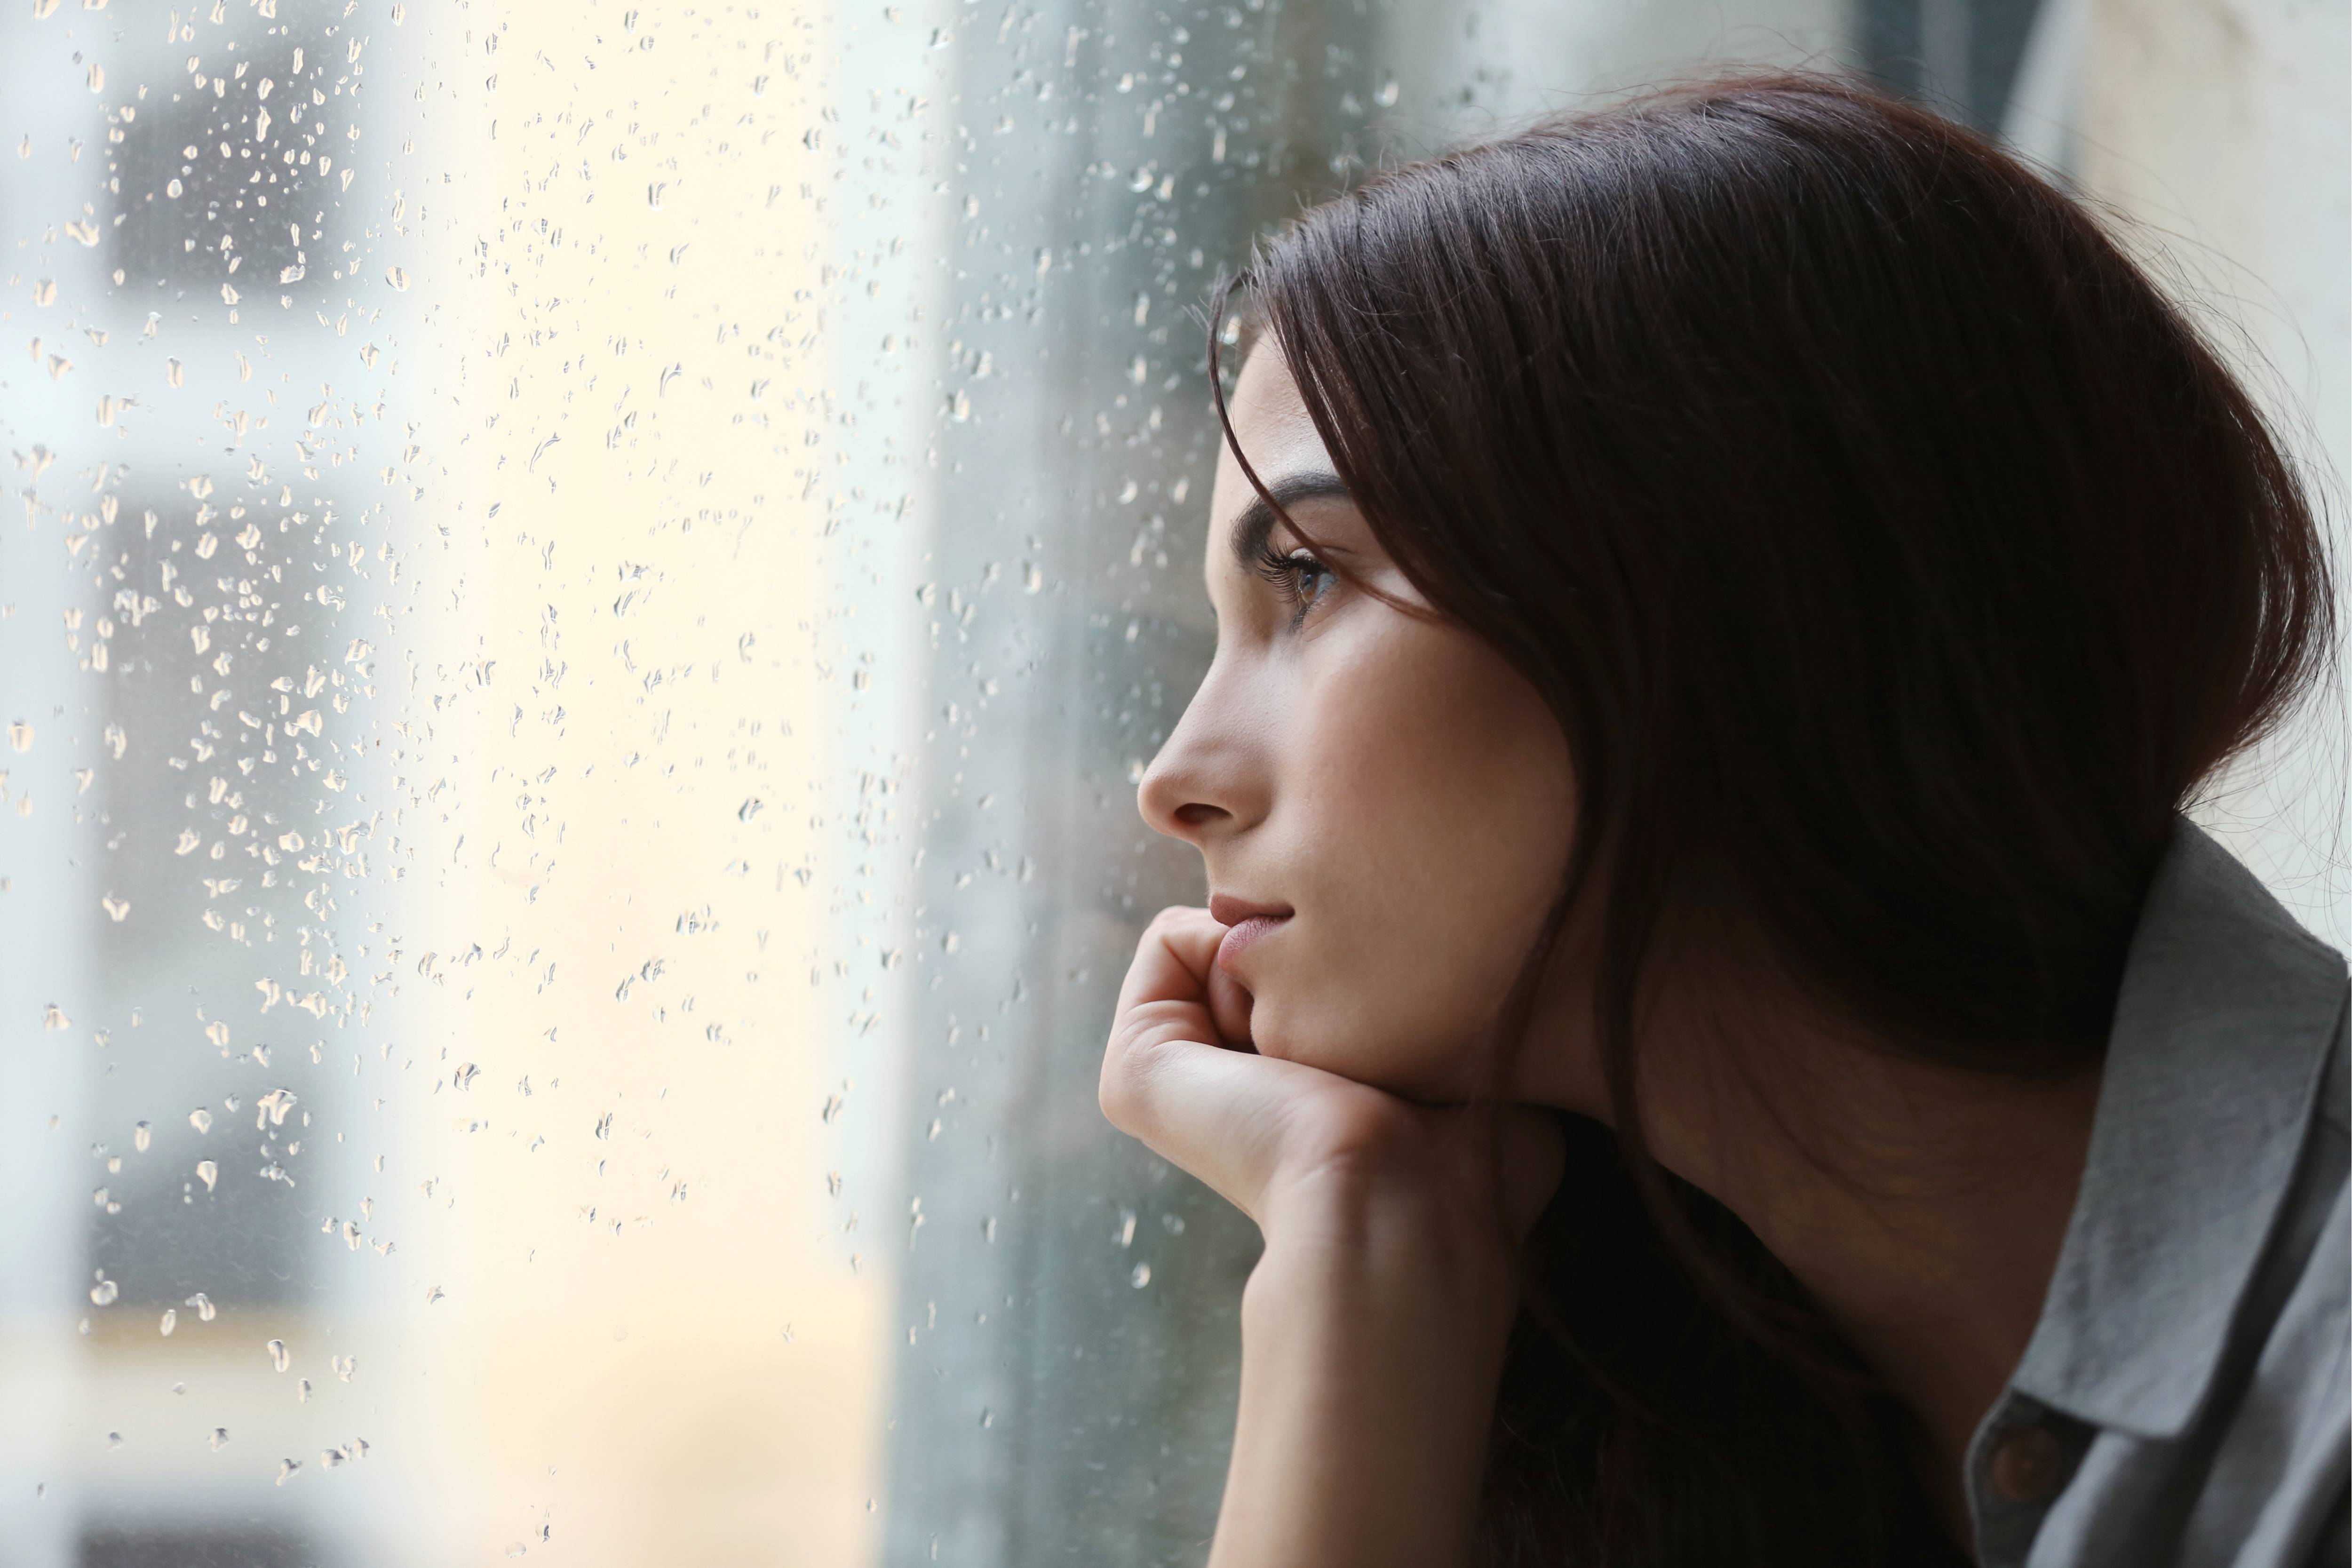 Woman stares out of window into the rain  (1).jpg